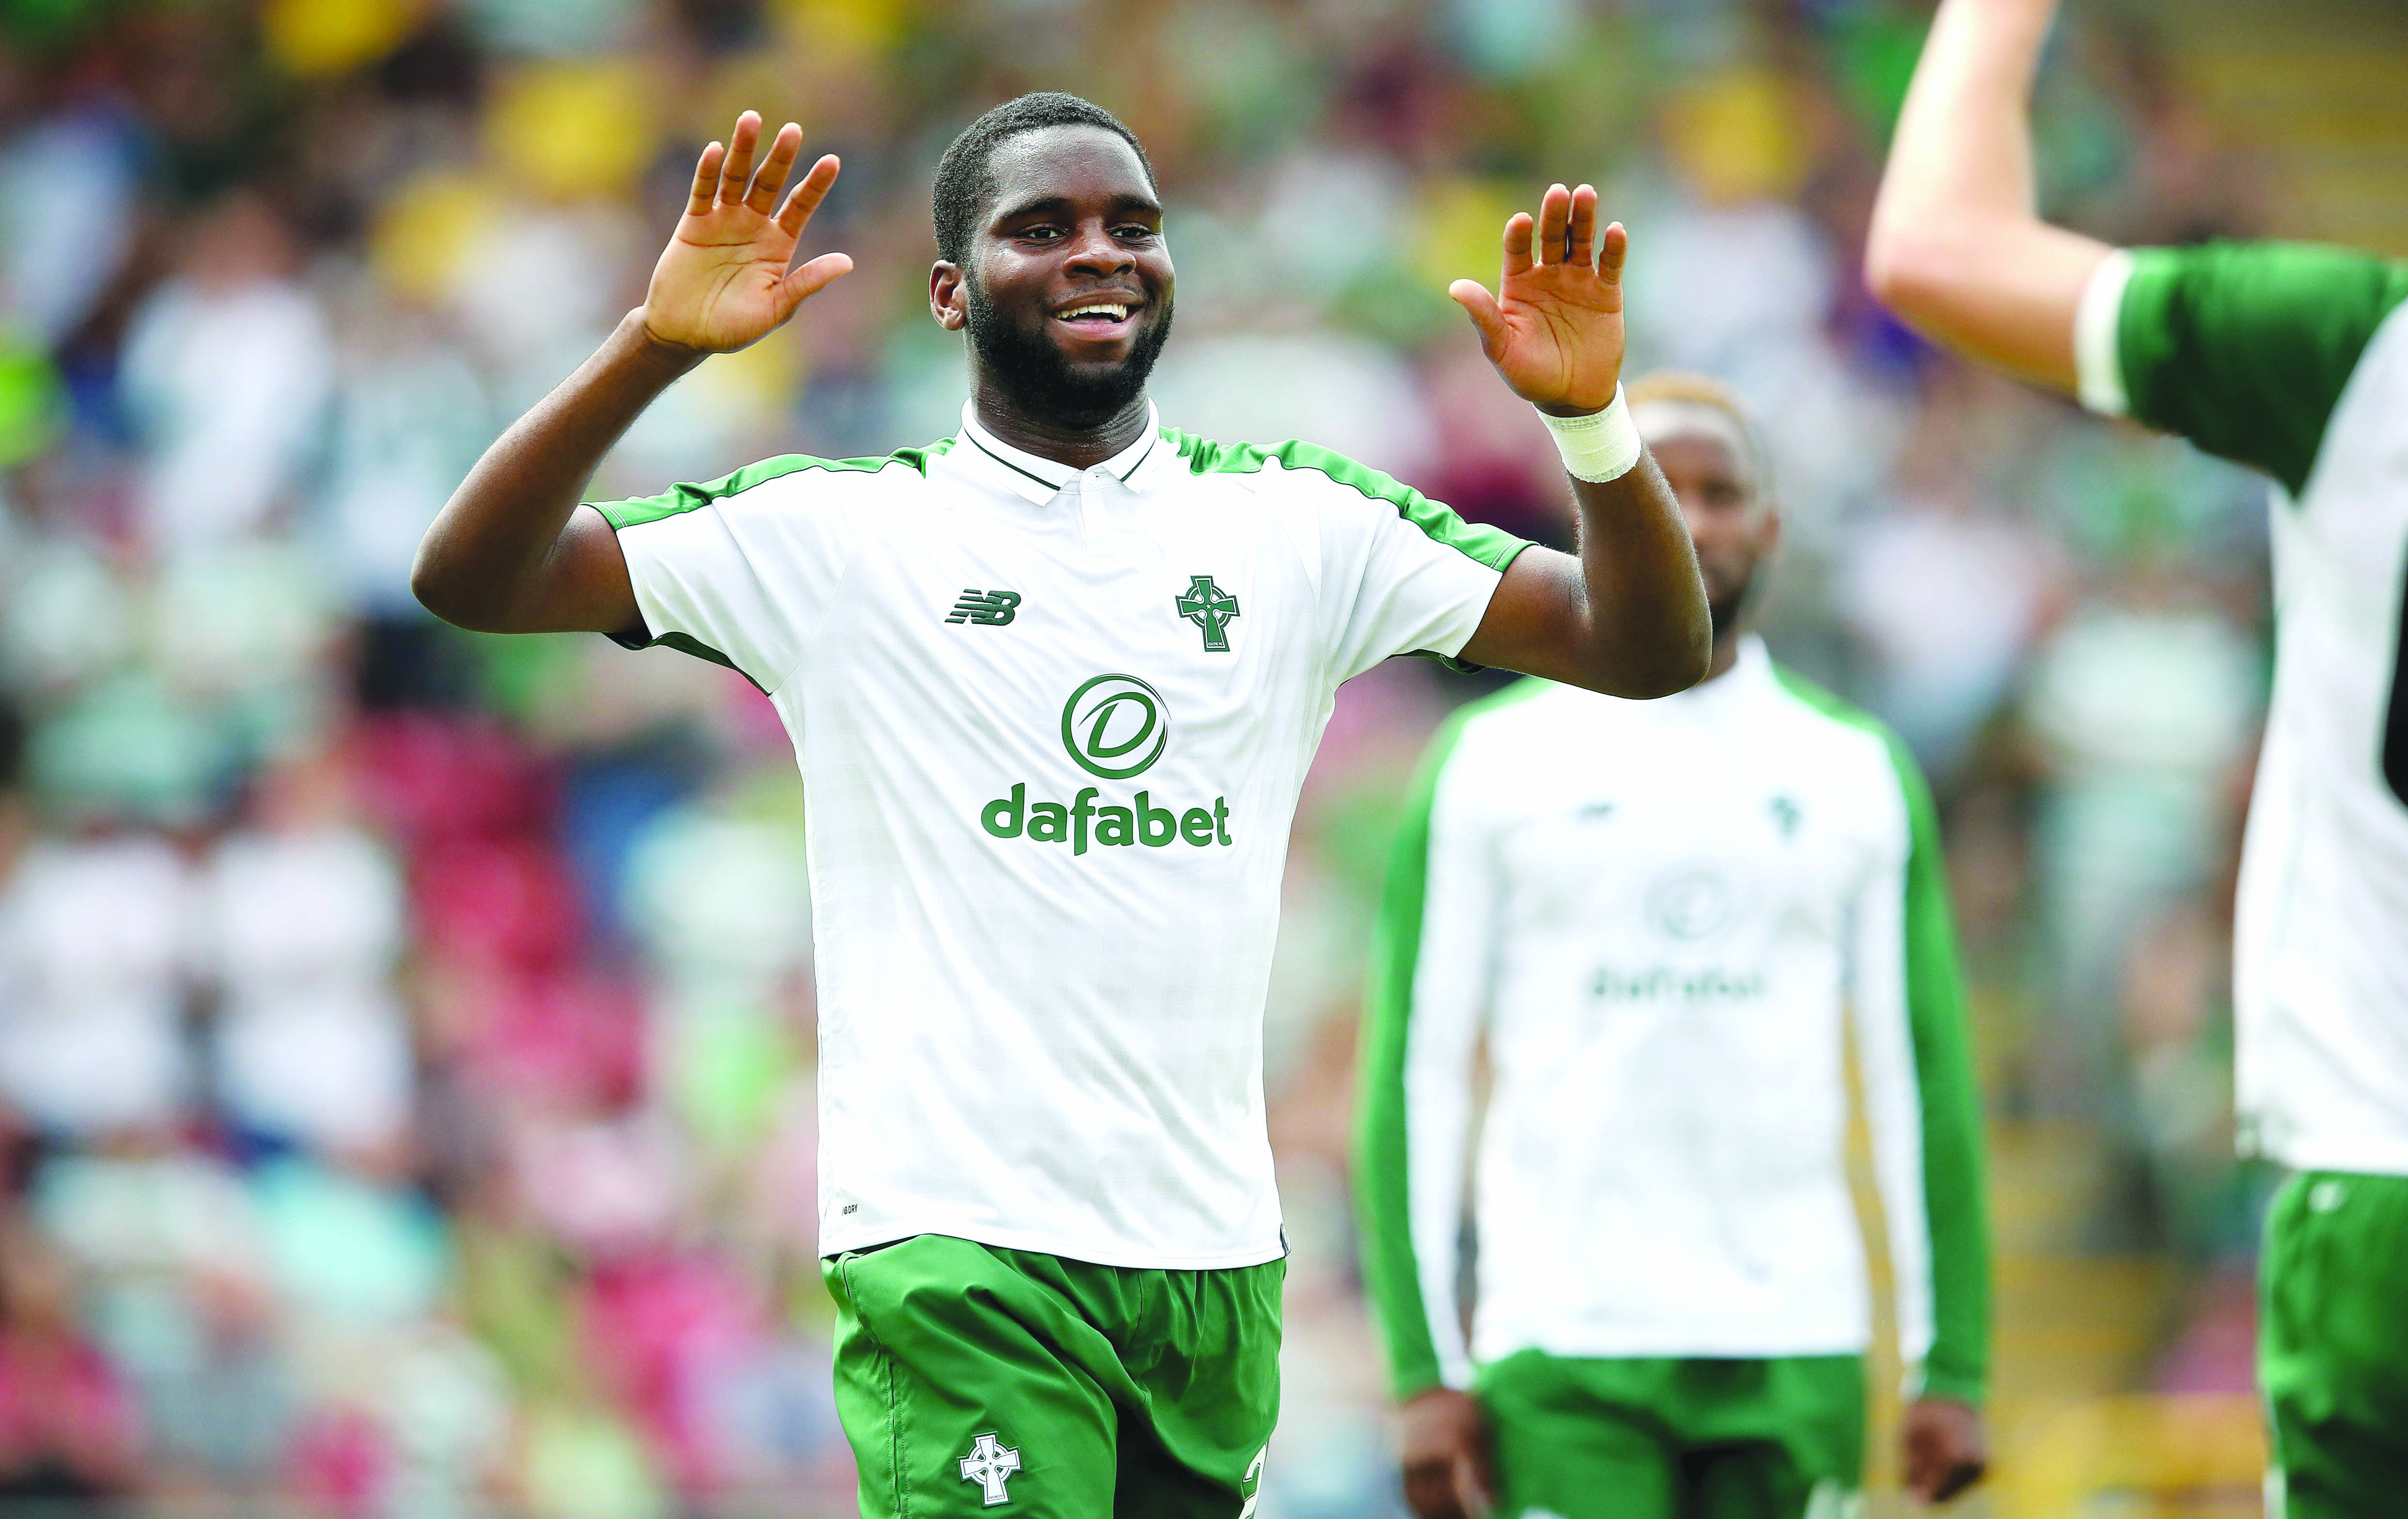 Celtic’s ability to keep hold of Odsonne Edouard could make or break their 10-in-a-row bid